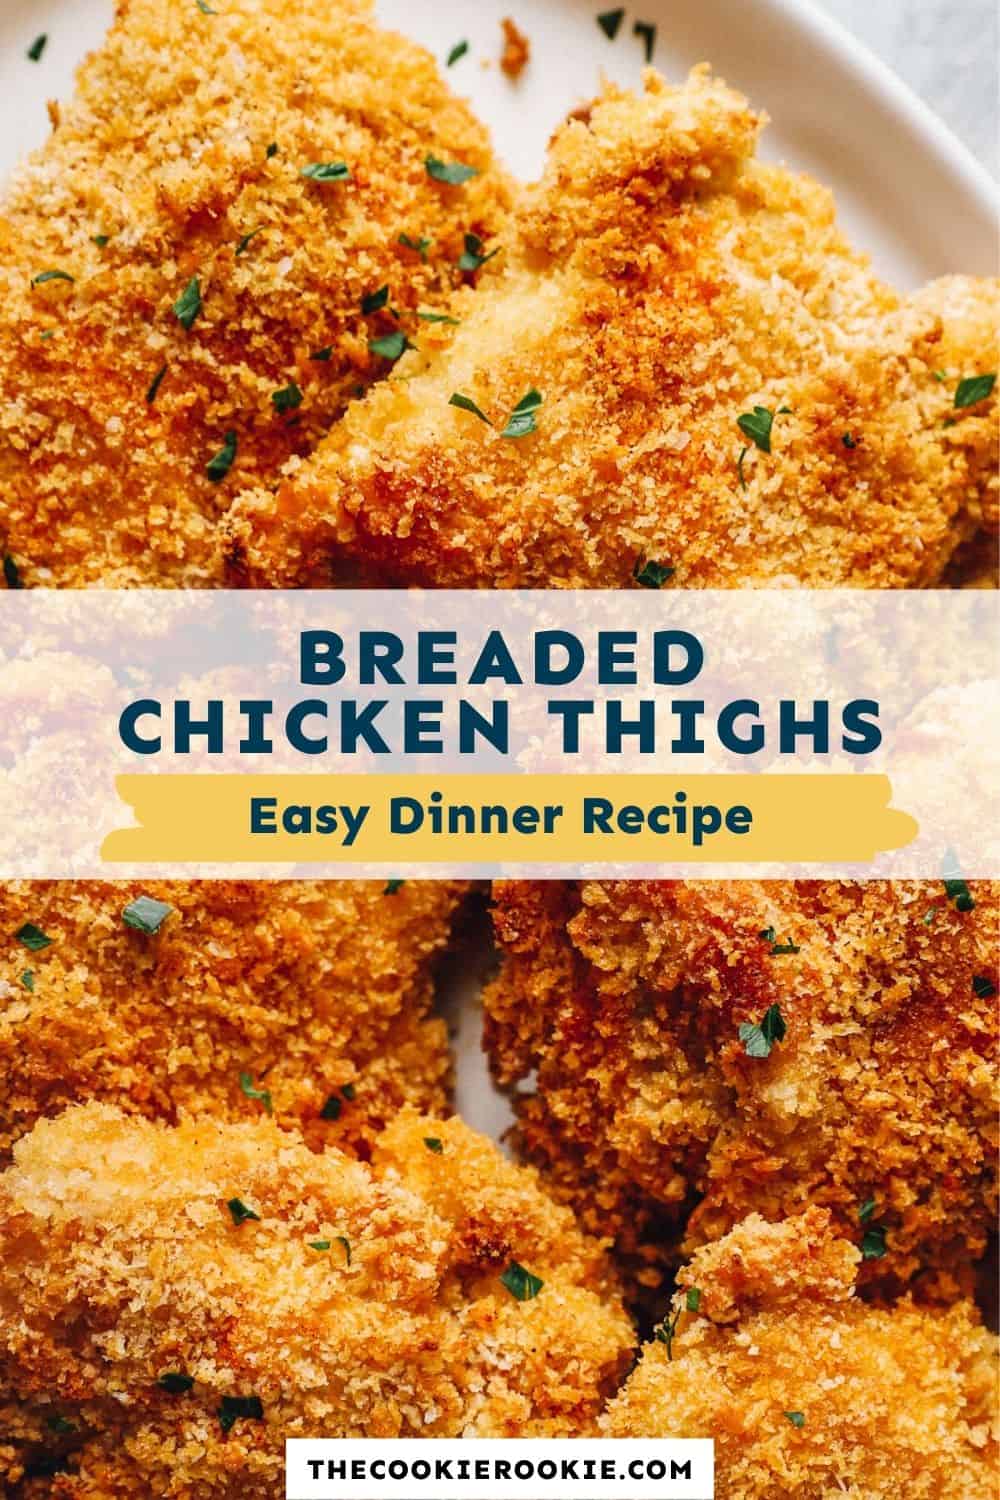 Crispy Baked Chicken Thighs Recipe - The Cookie Rookie®